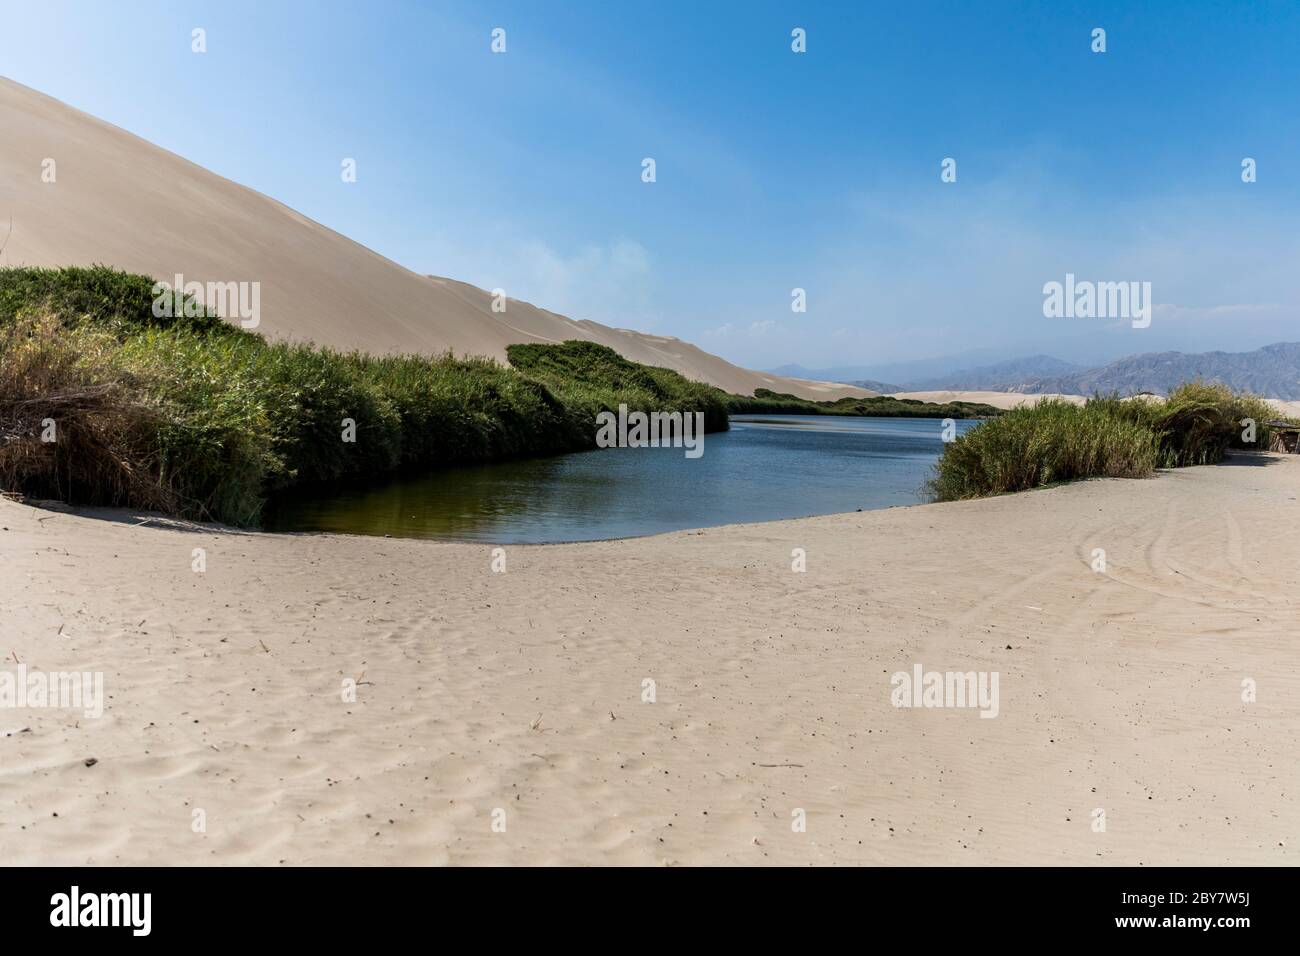 beautiful oasis in the middle of the desert with plants near the water and blue sky Stock Photo